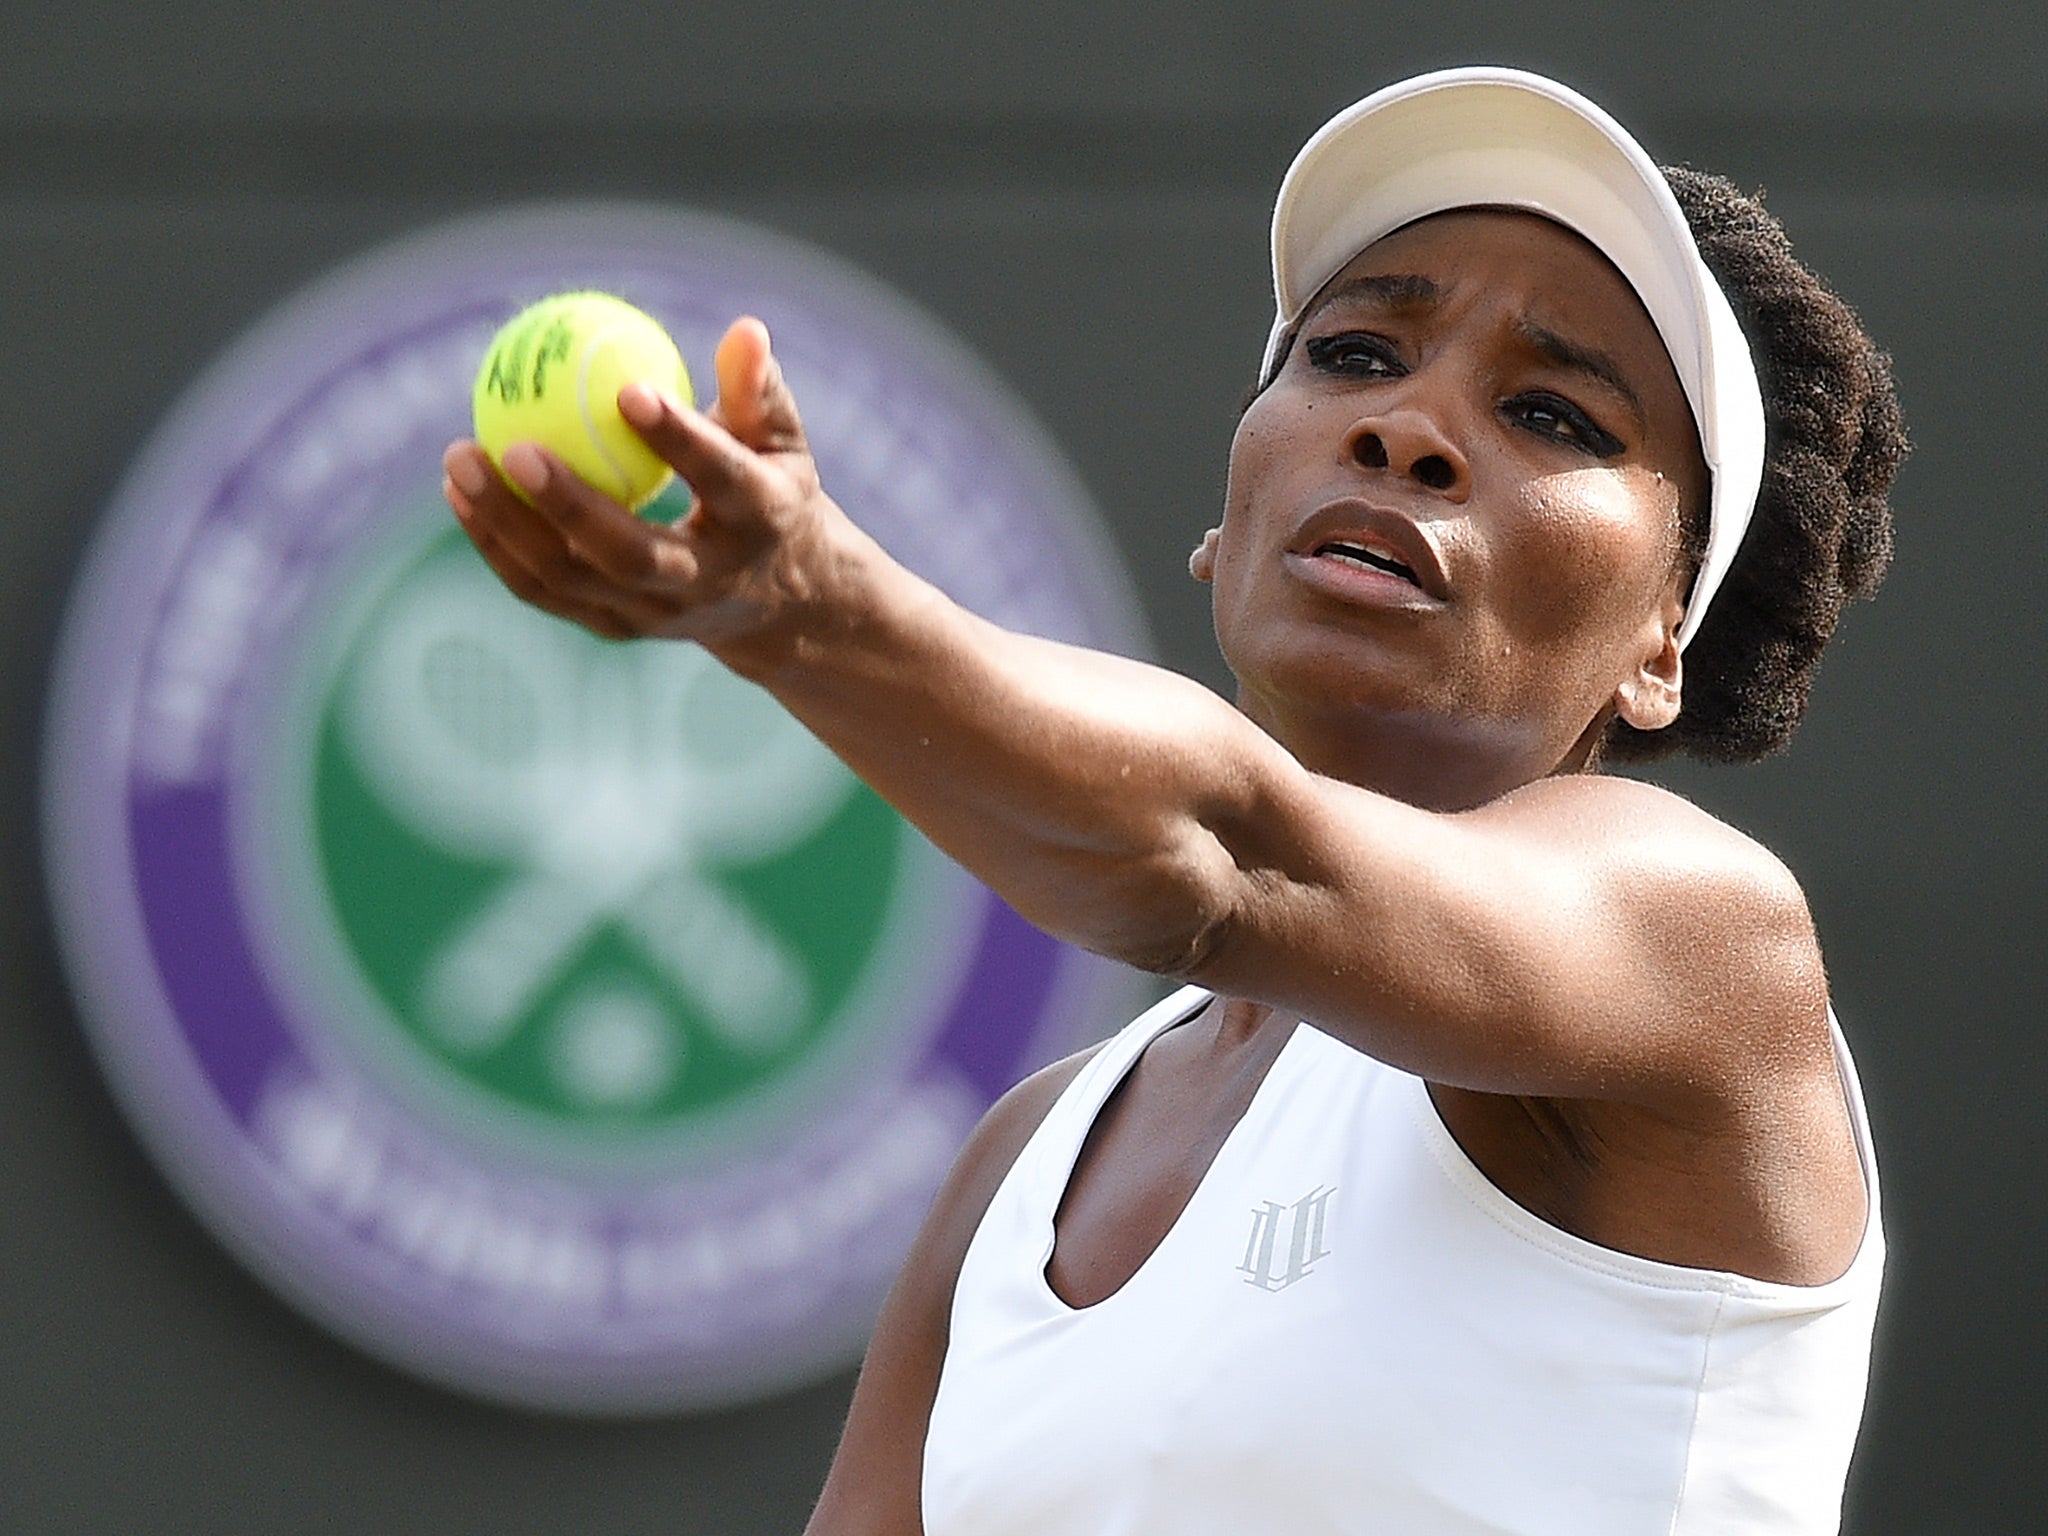 Venus Williams was involved in a fatal car crash in Florida last month